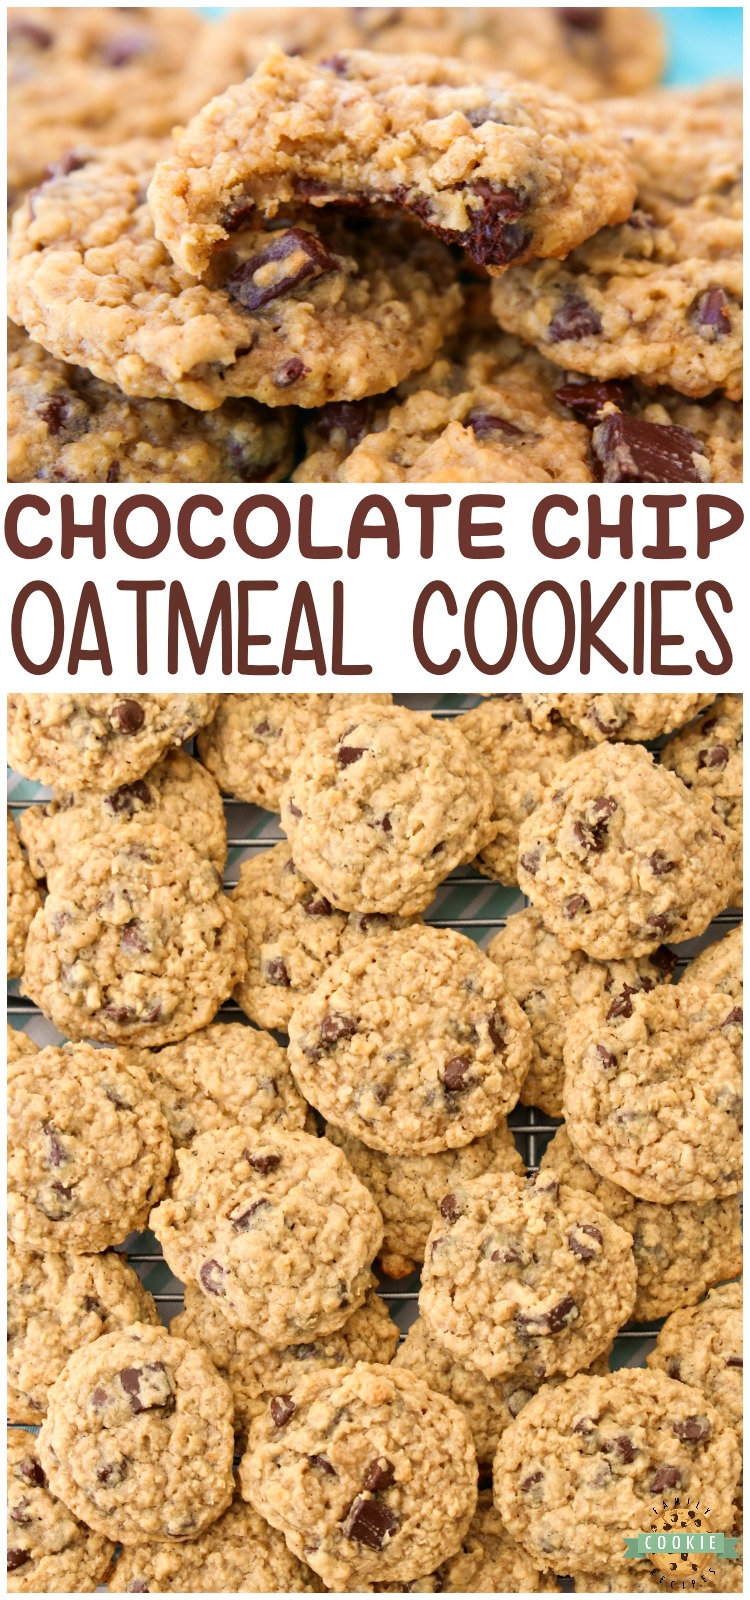 Chocolate Chip Oatmeal Cookies made with classic ingredients for the perfect soft & chewy oatmeal cookie! Amazing homemade cookie recipe you have to try! #cookies #oatmeal #chocolatechip #baking #dessert #recipe from FAMILY COOKIE RECIPES via @buttergirls